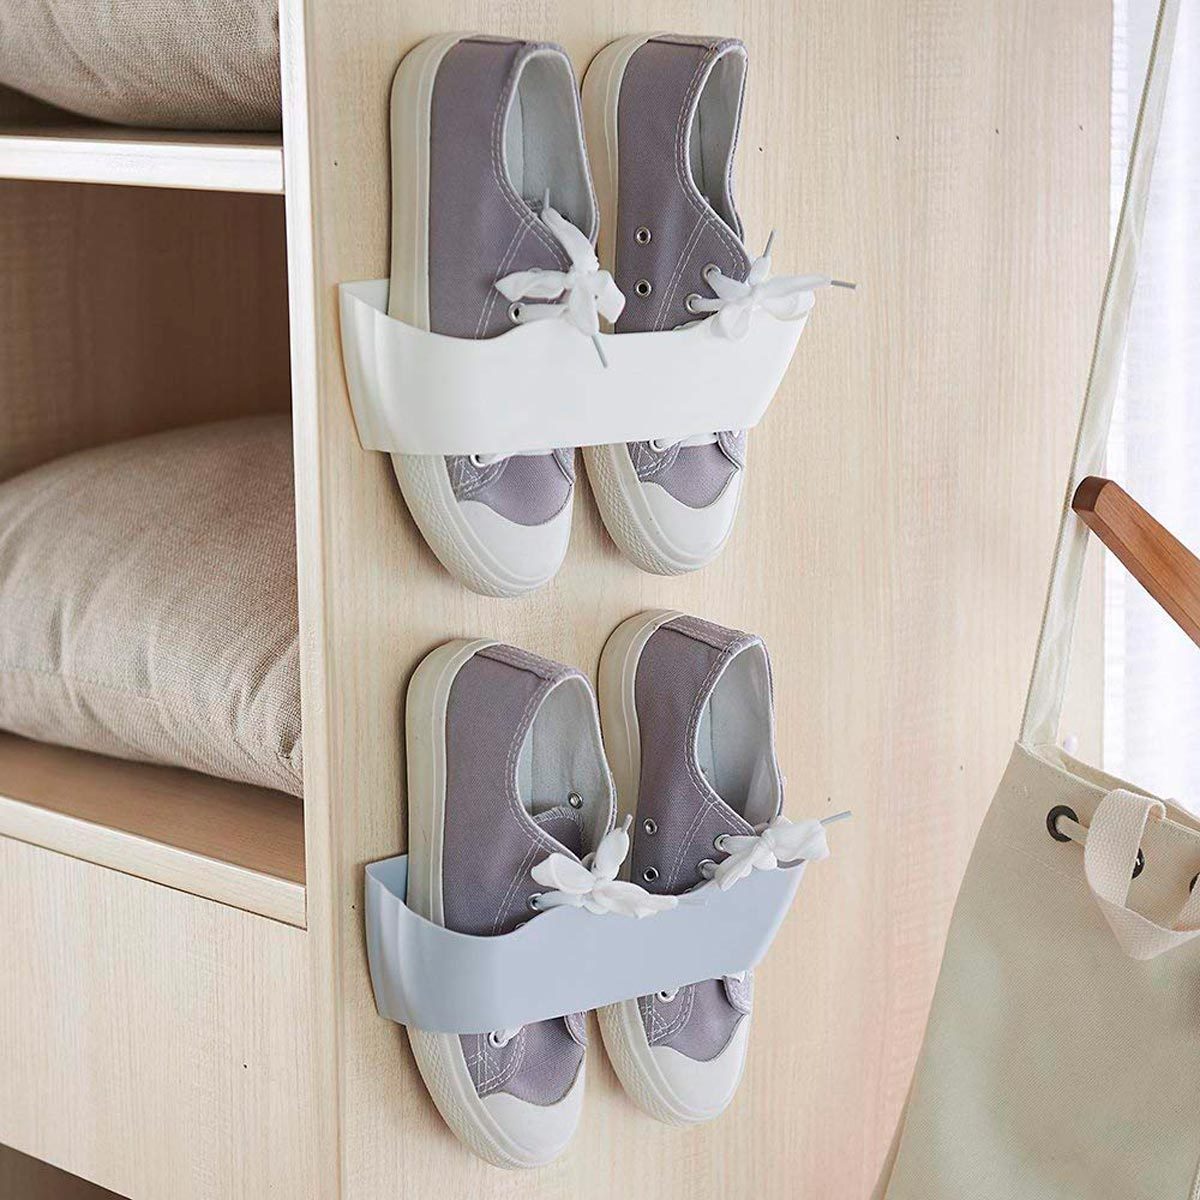 Set of 2 Iron Esdella Shoes Rack Organizer Mounted Wall Storage Shelf Shoe Holder Keeps Any Shoes Off The Floor 